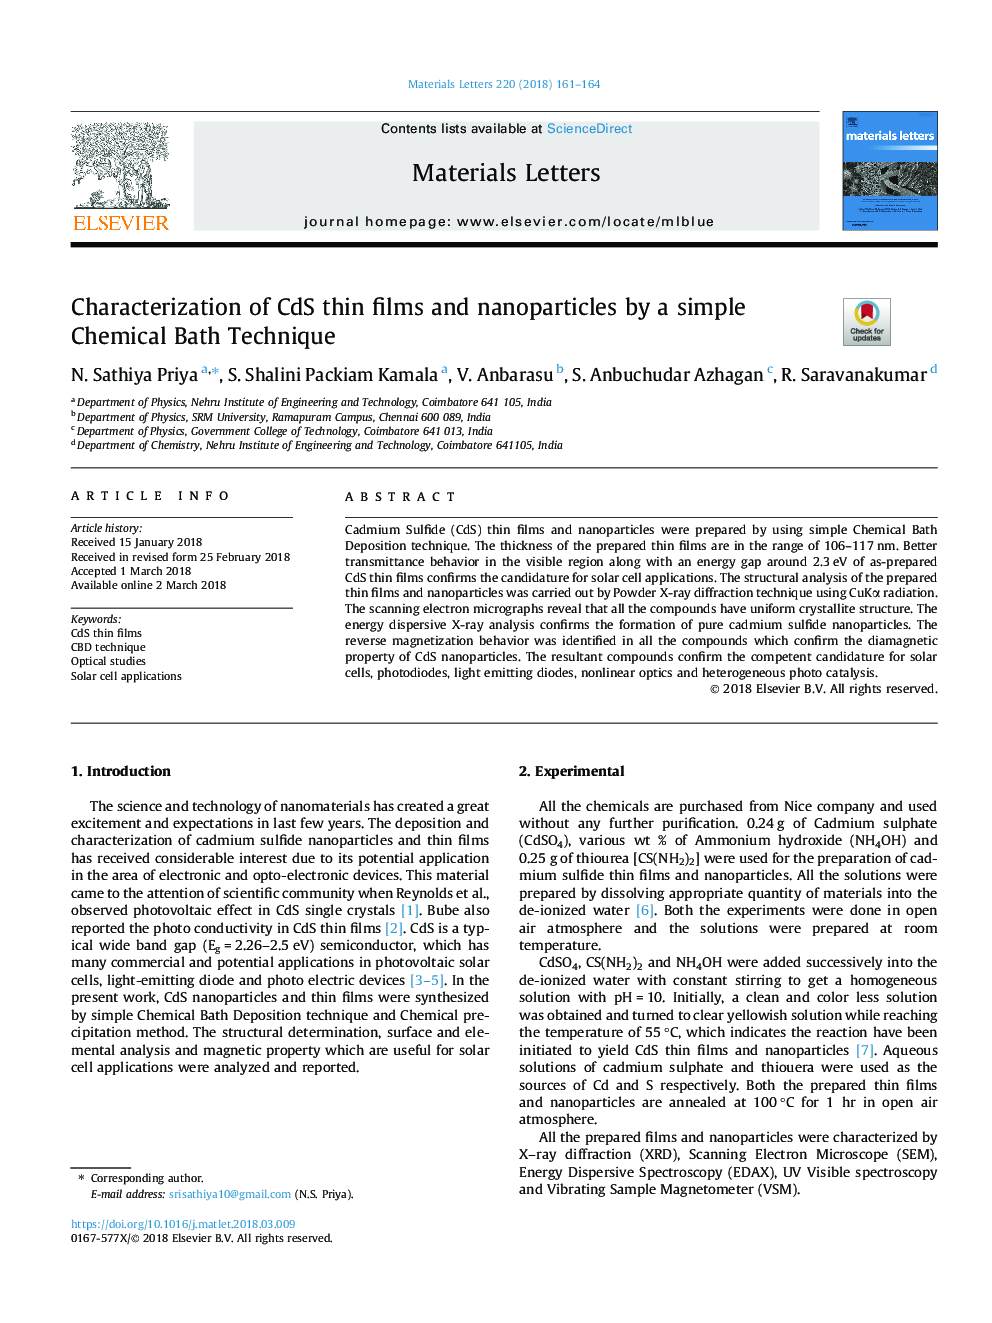 Characterization of CdS thin films and nanoparticles by a simple Chemical Bath Technique